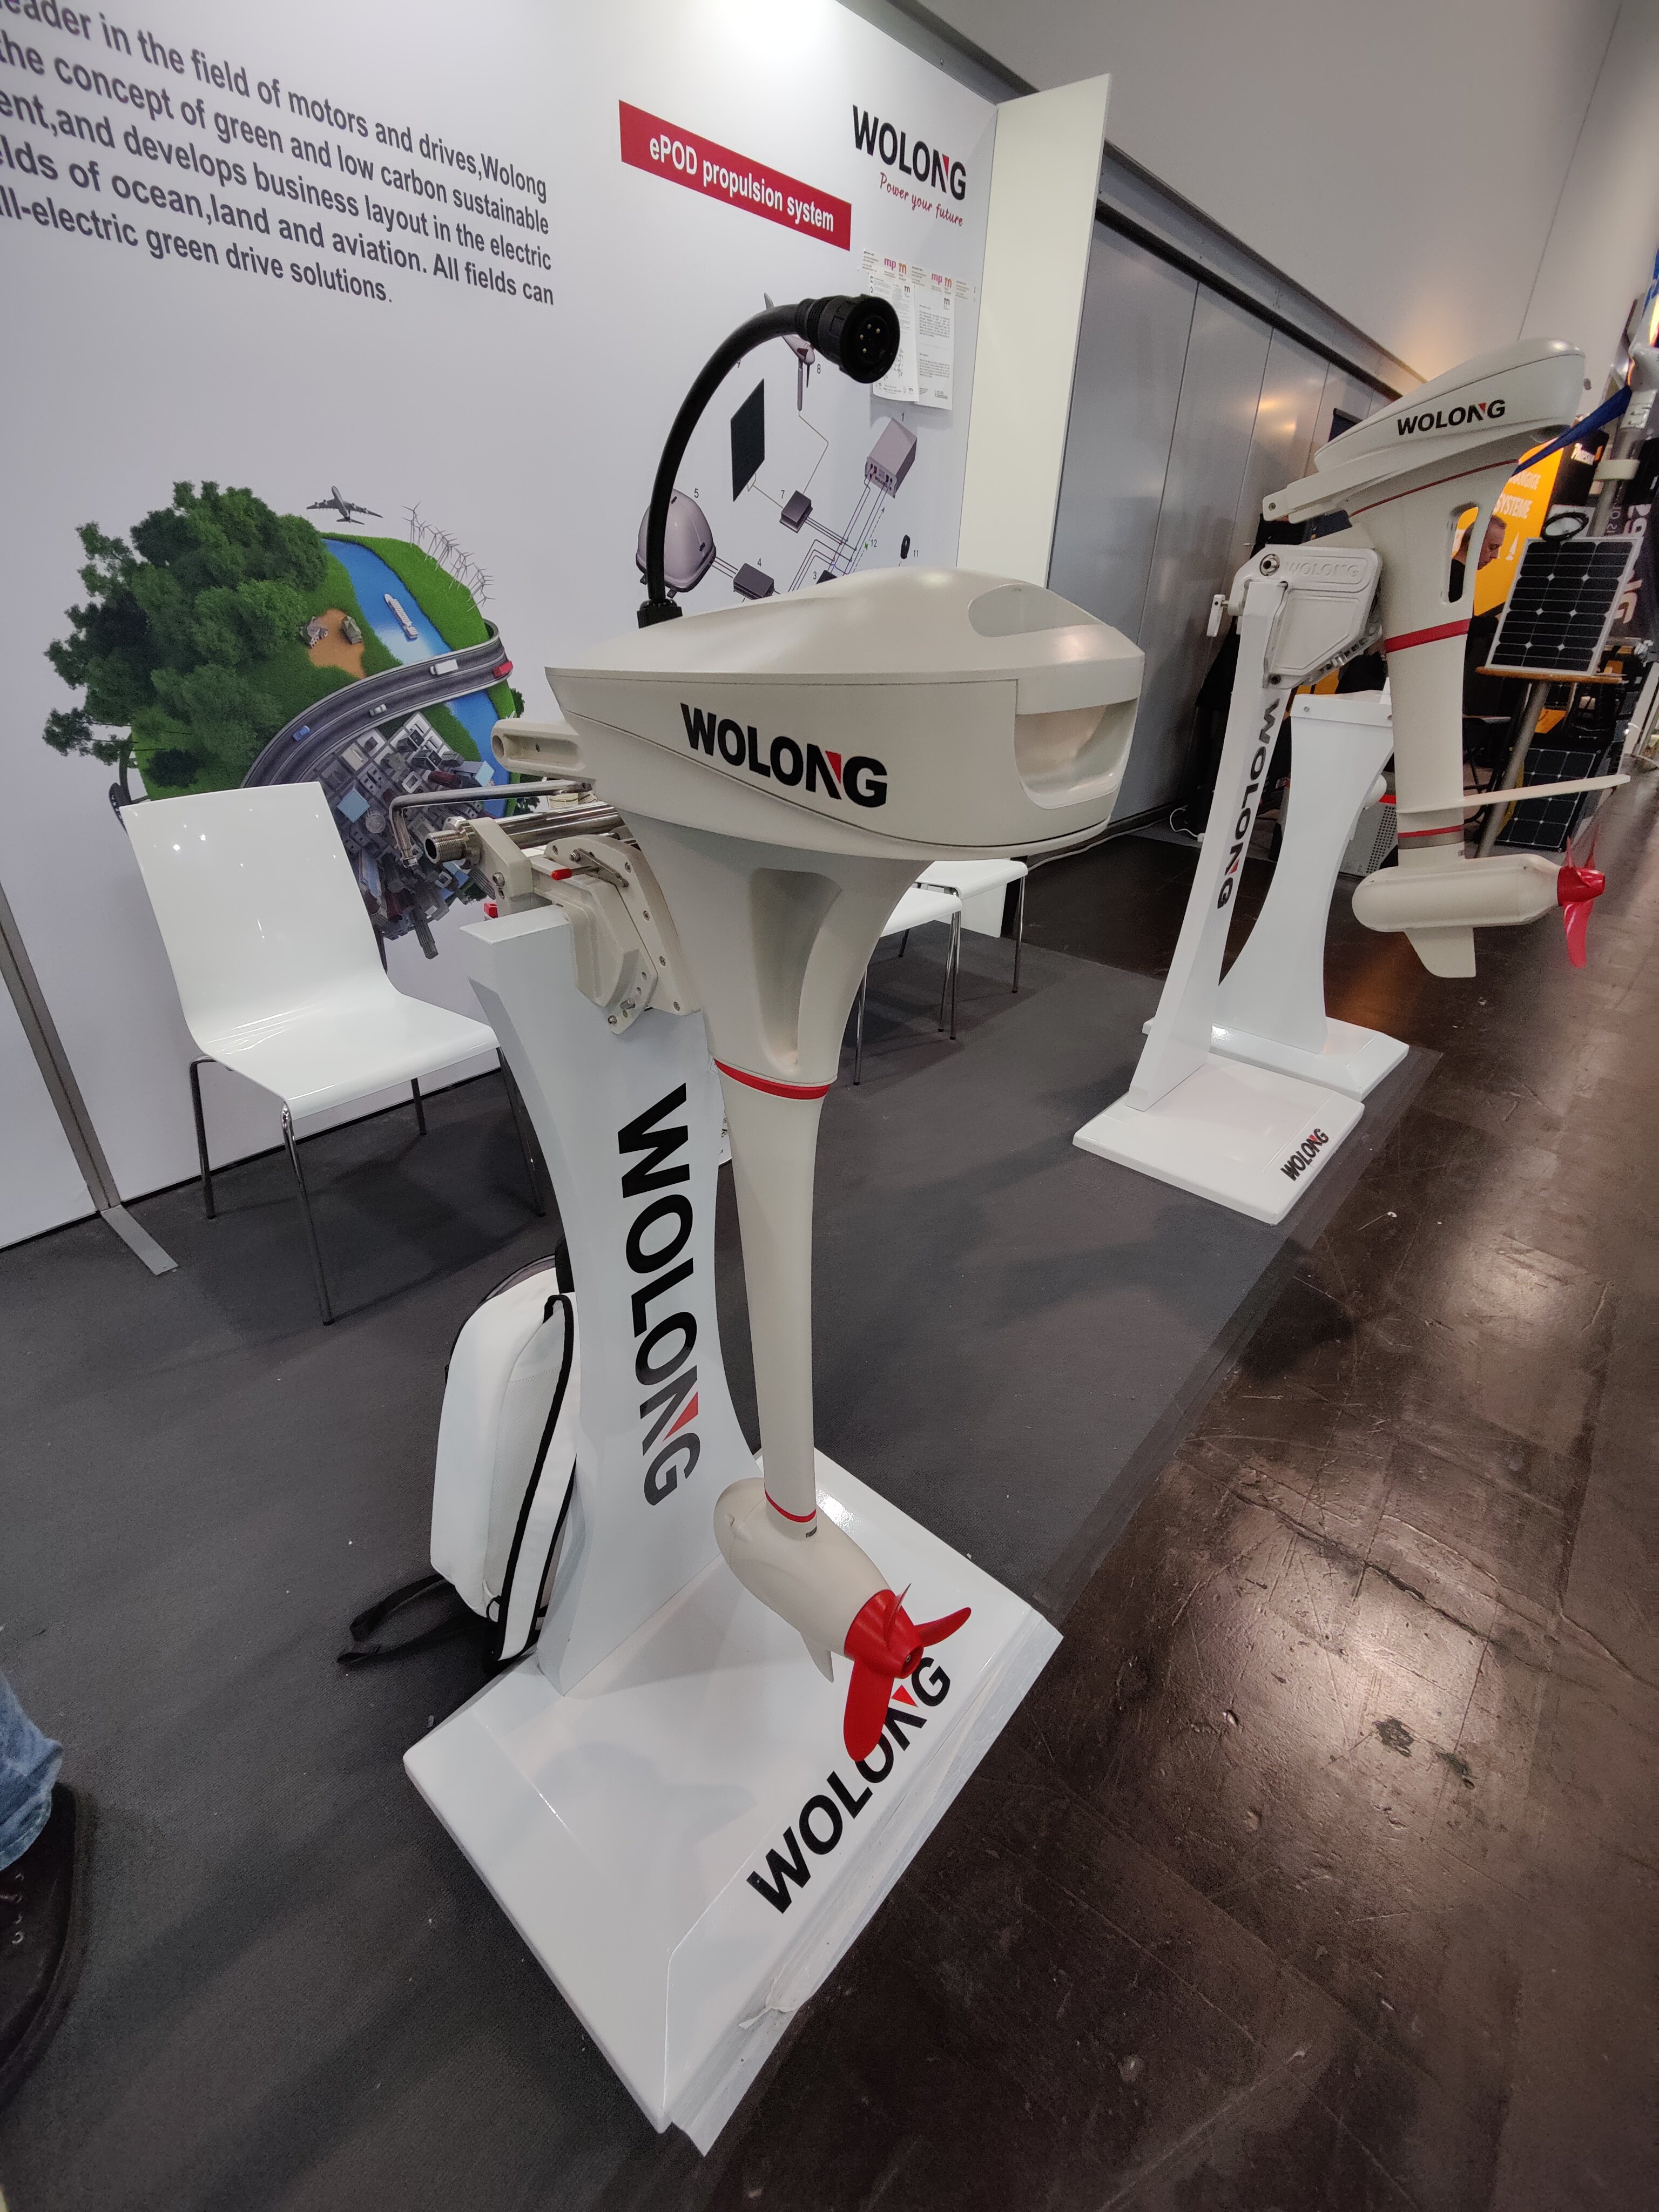 Wolong electric motors for the first time at the boat show-1